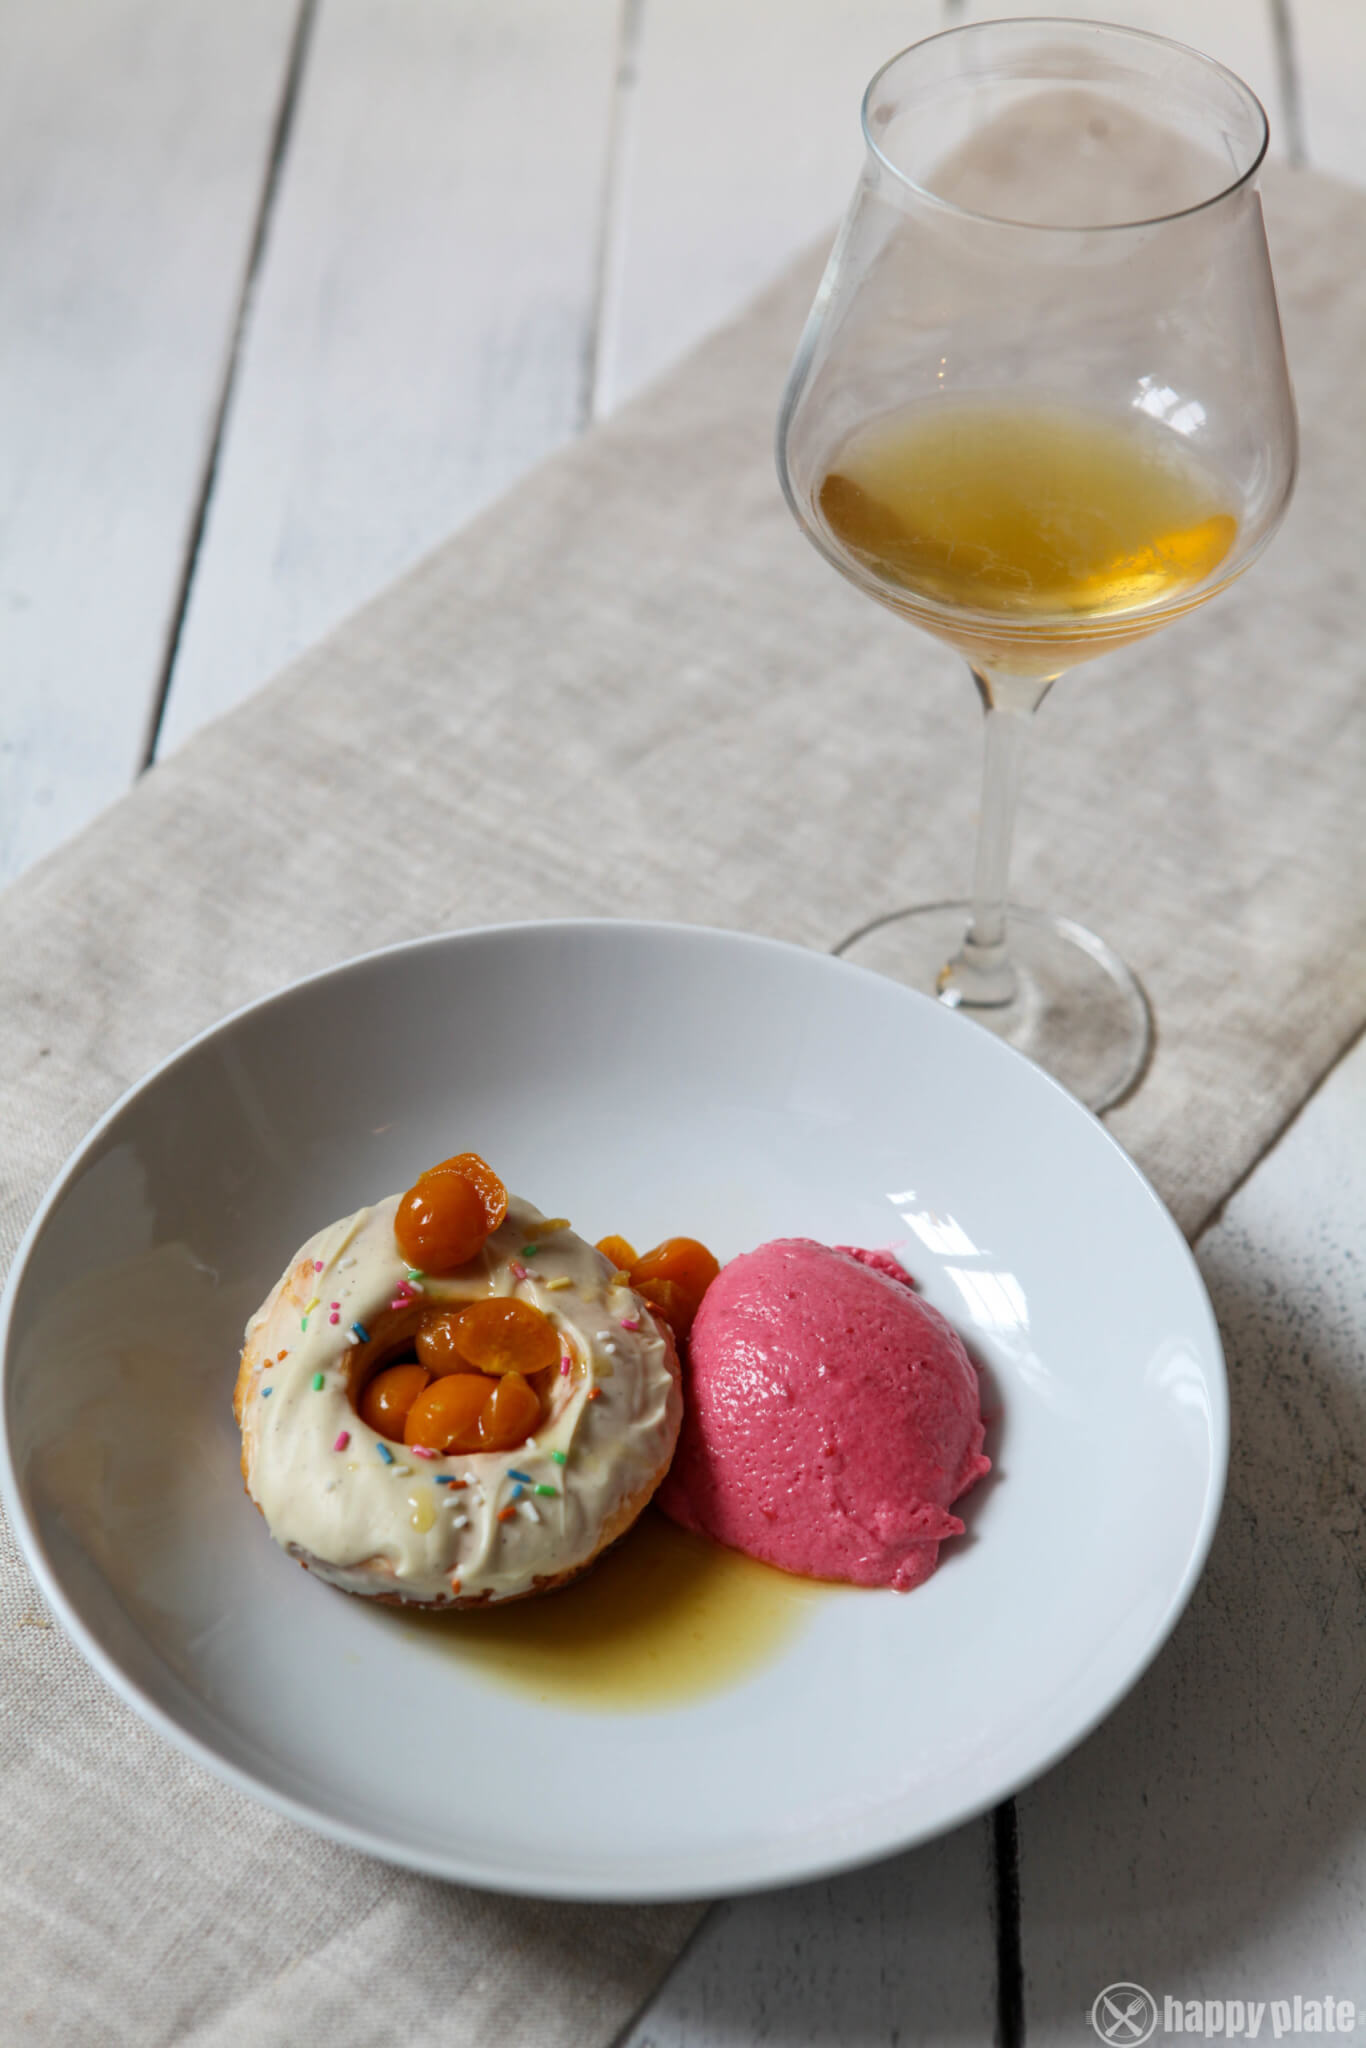 Himbeer-Gin Mousse mit Physalis Ragout im Donut | happy plate